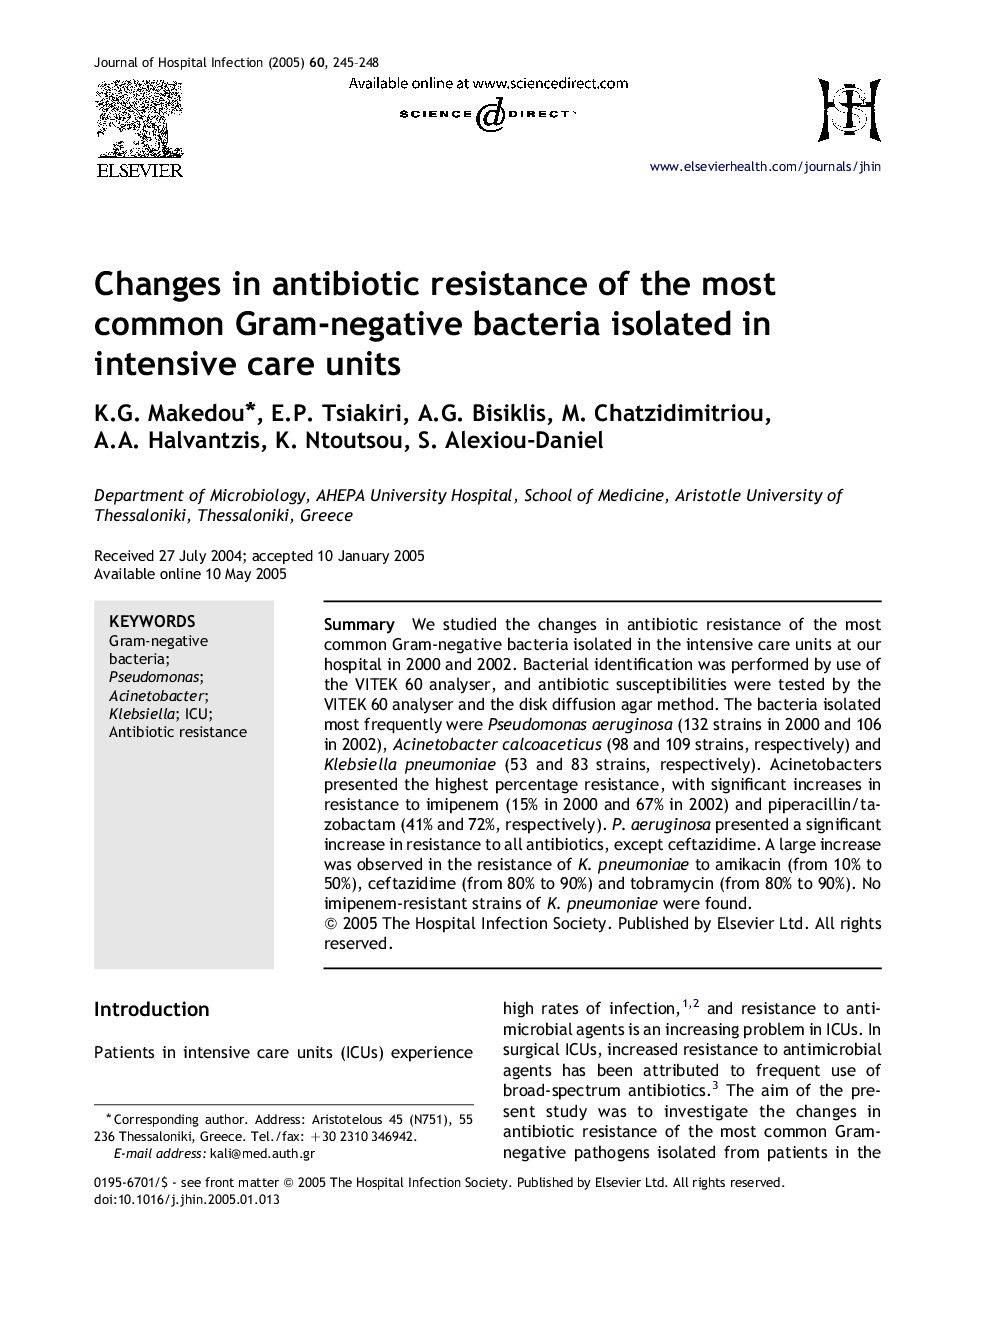 Changes in antibiotic resistance of the most common Gram-negative bacteria isolated in intensive care units